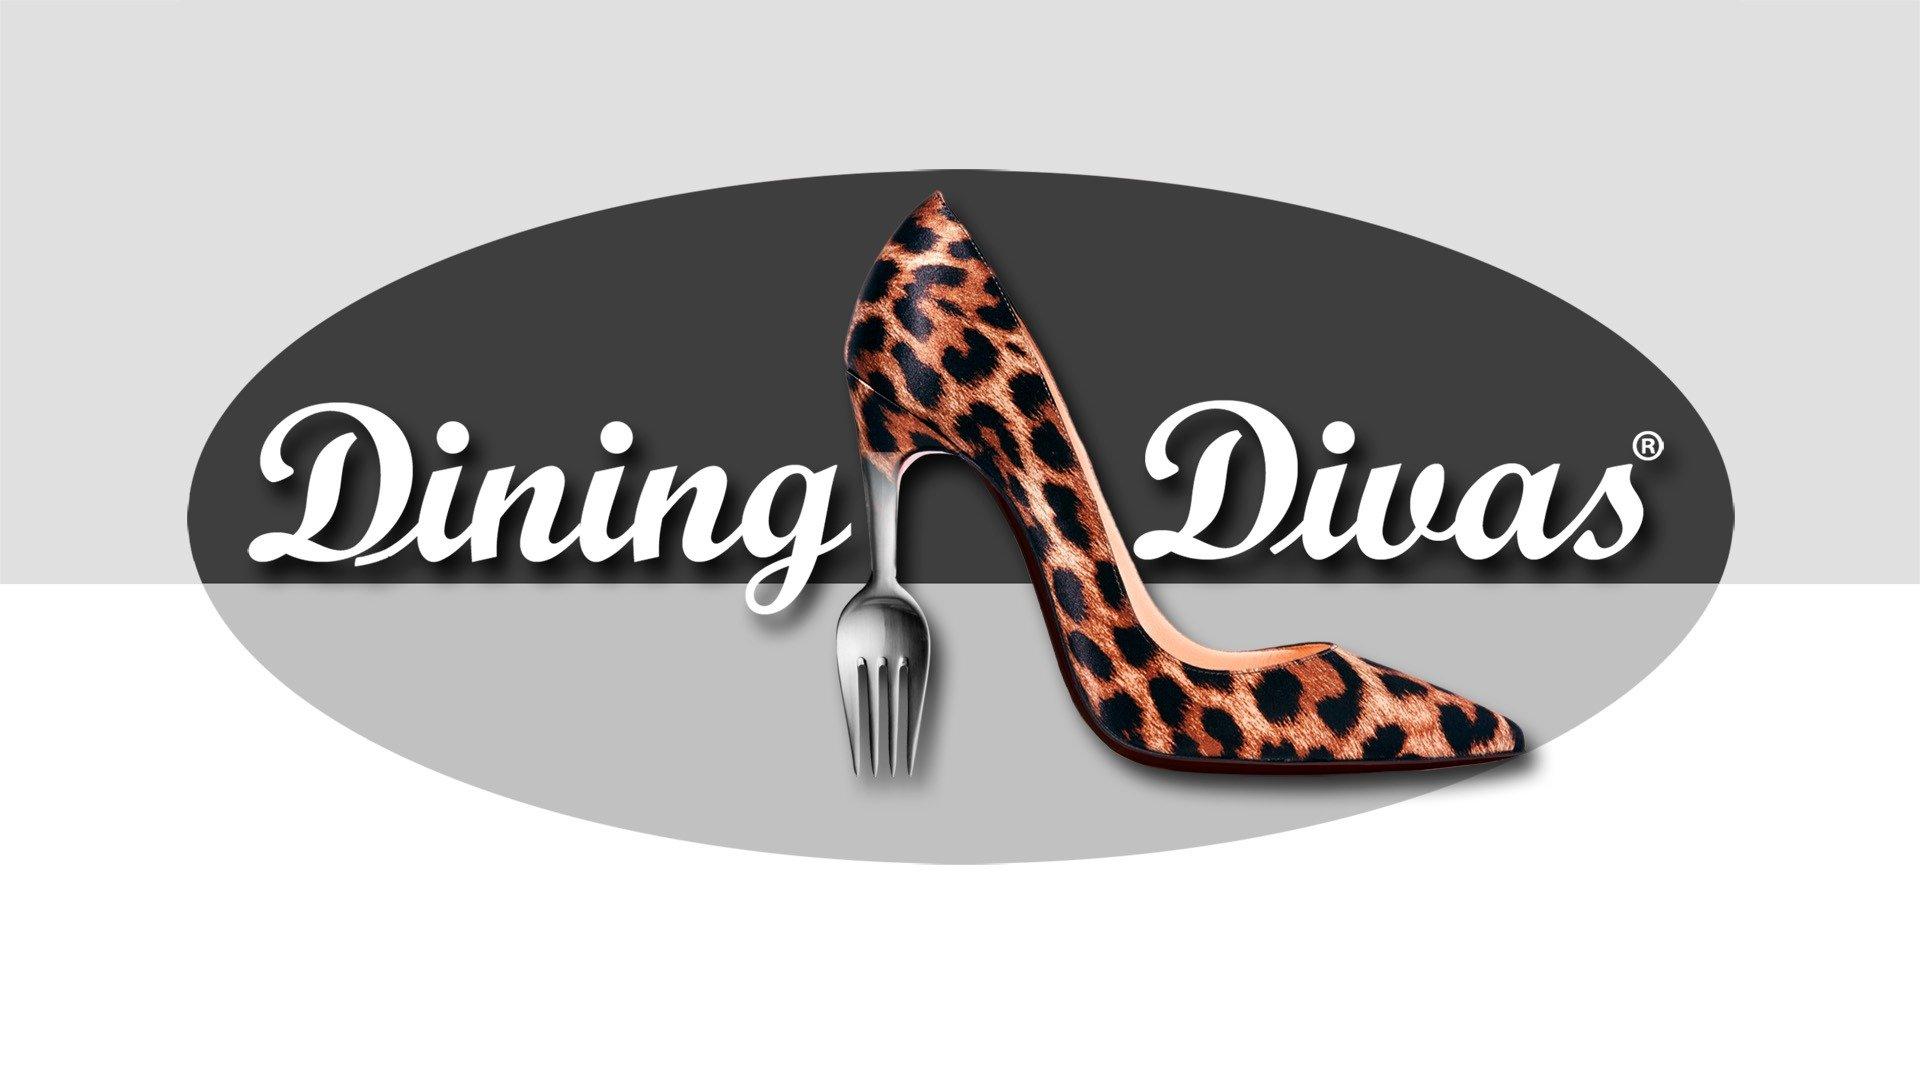 Watch Dining Streaming Online on Philo (Free Trial)